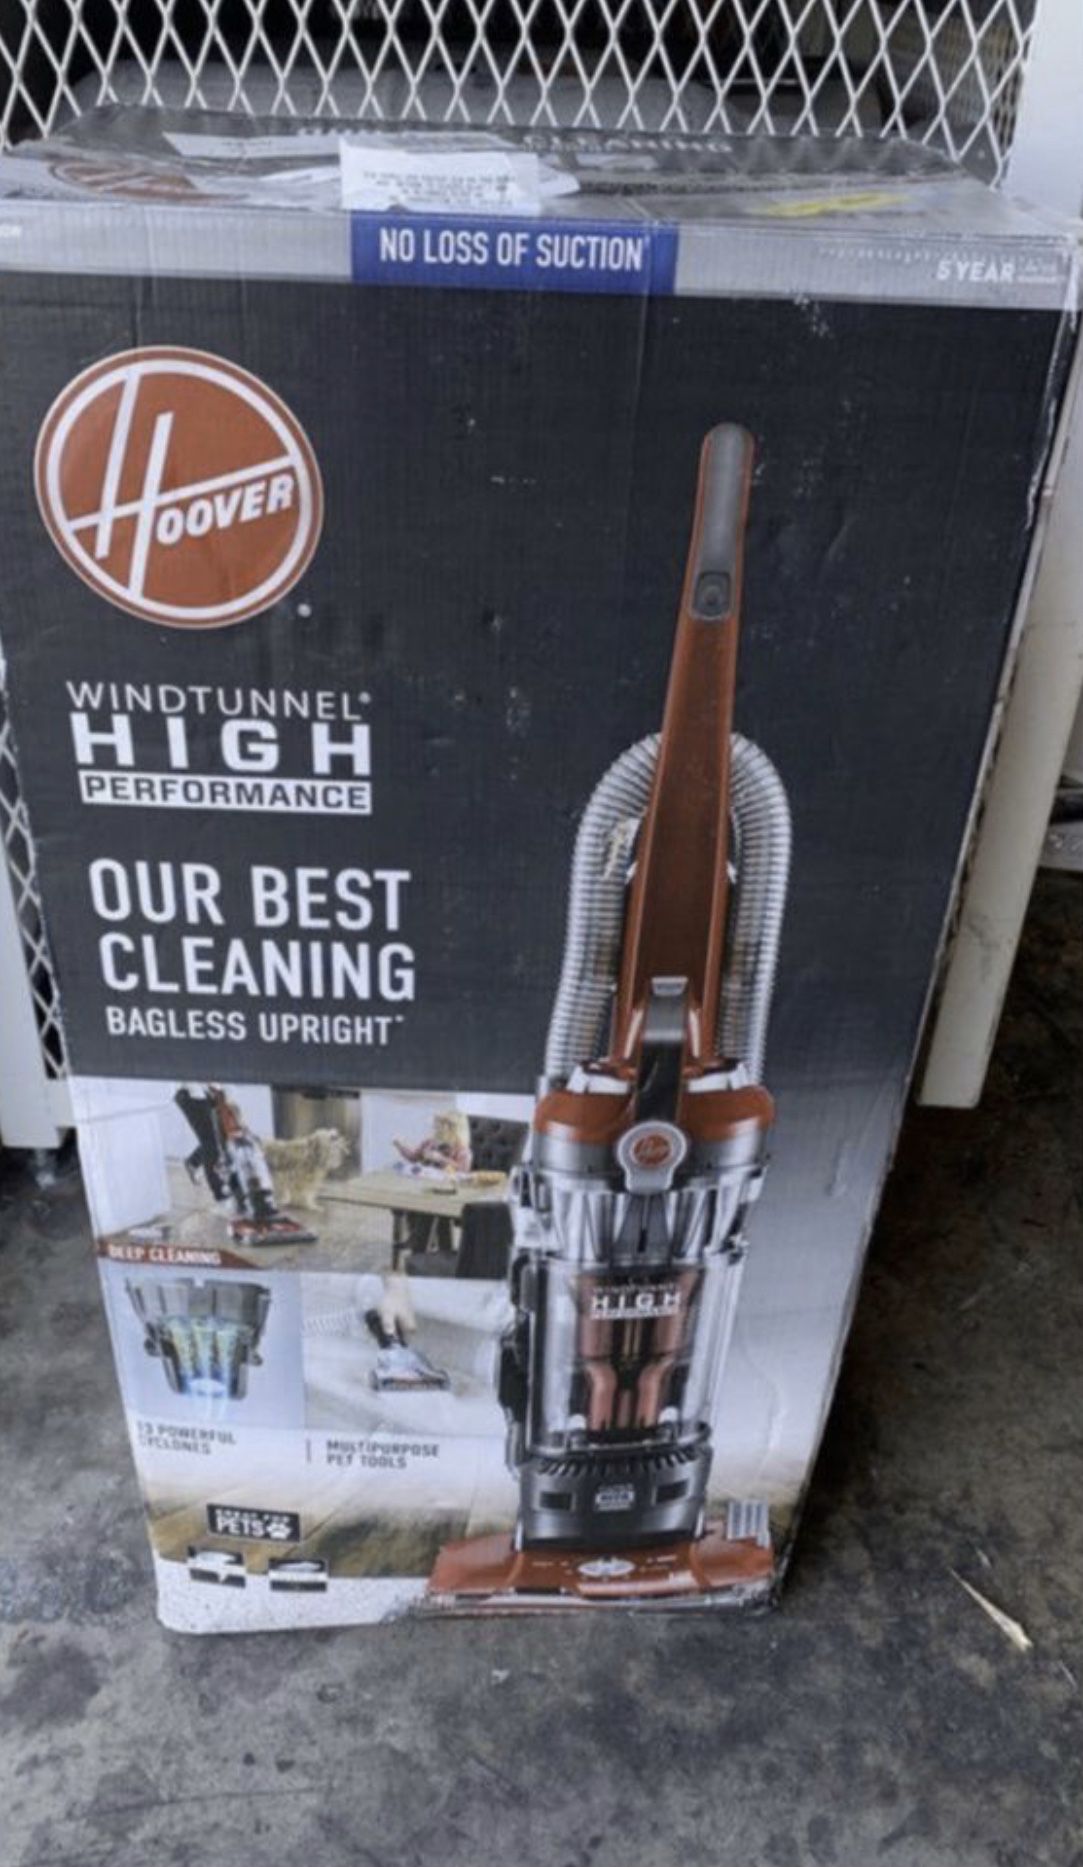 Hoover - WindTunnel 3 High Performance Pet Bagless Upright Vacuum cleaner